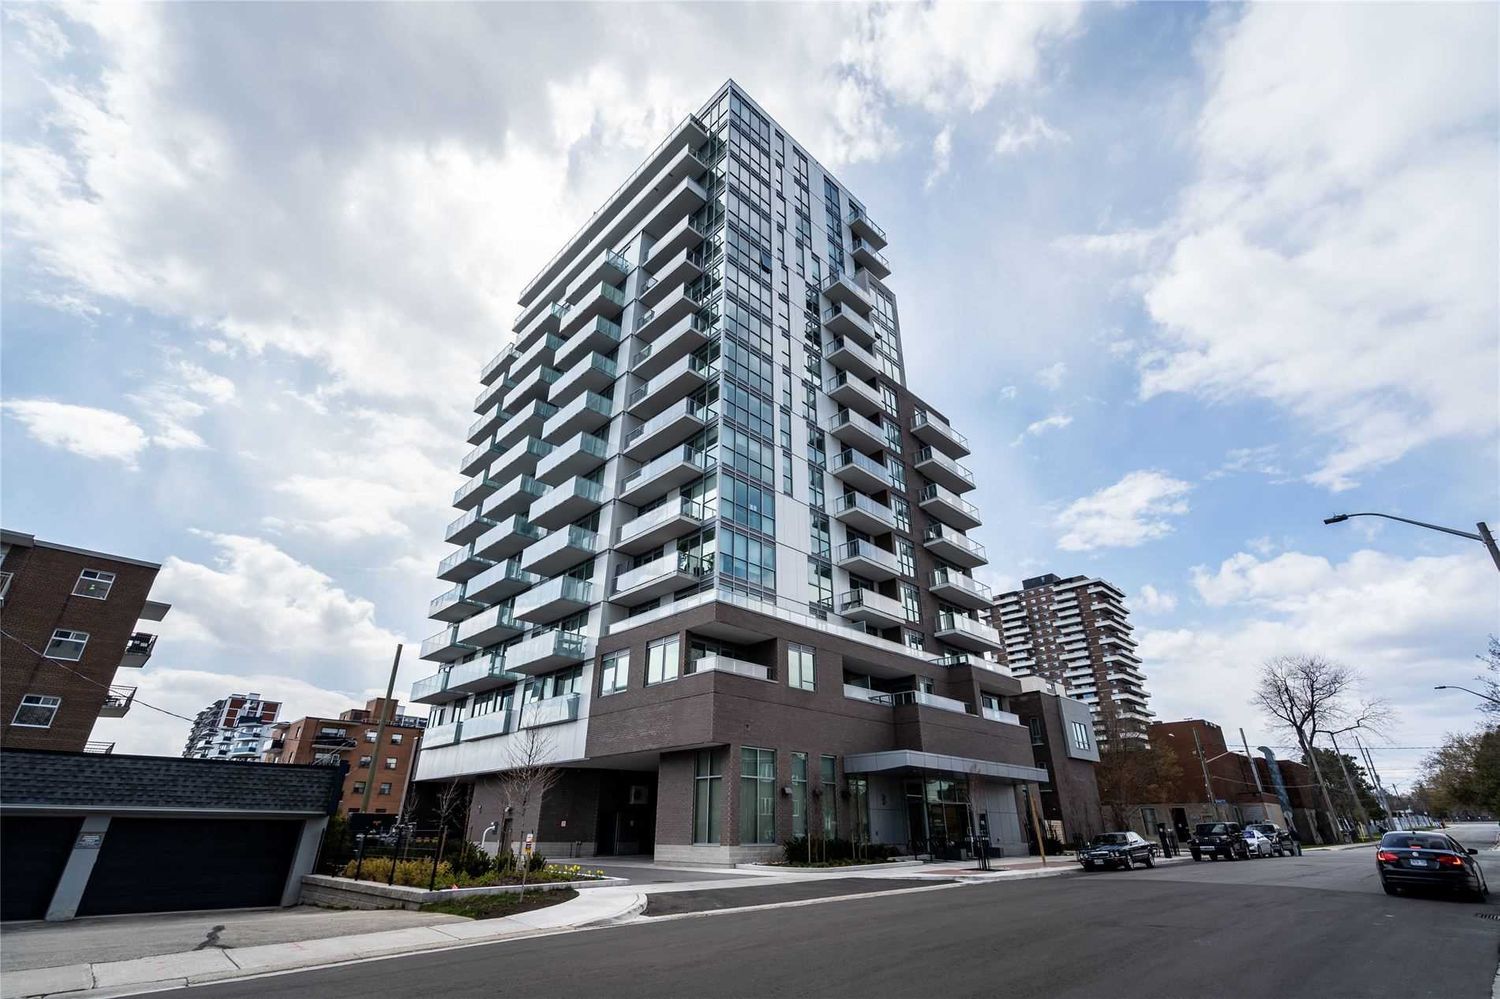 8 Ann Street. NOLA Condos is located in  Mississauga, Toronto - image #1 of 2